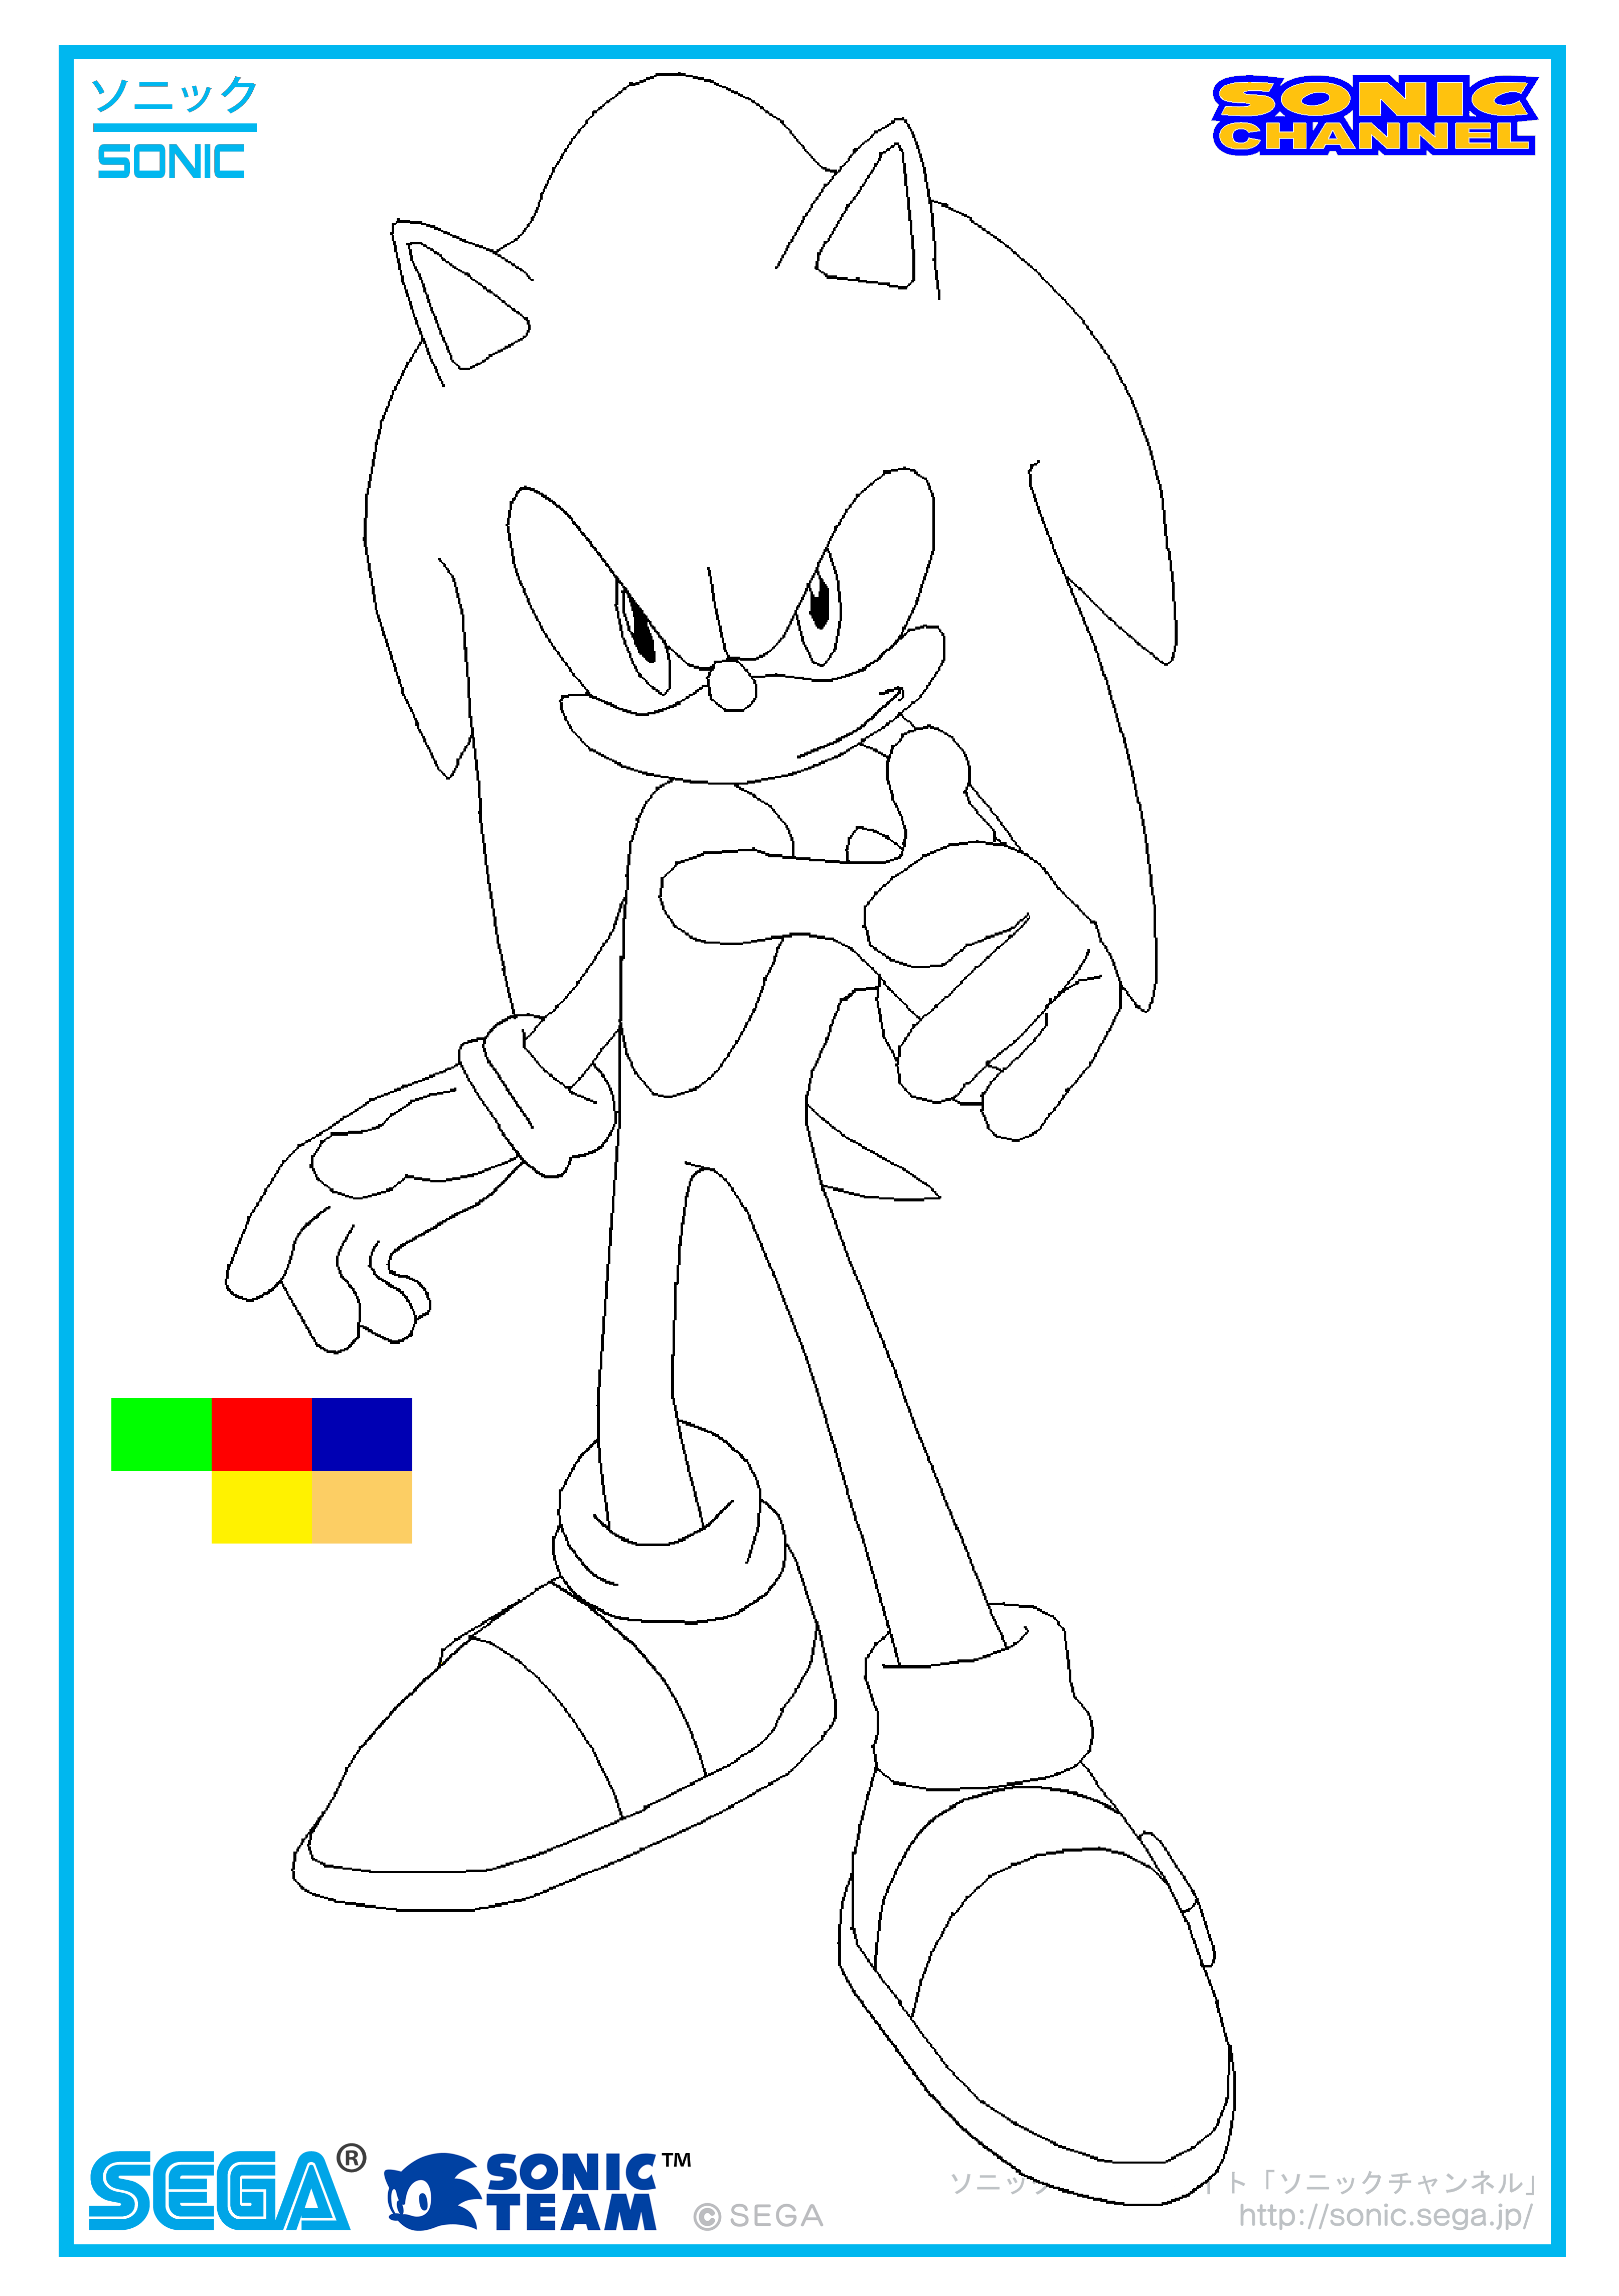 Free Classic Sonic Coloring Pages, Download Free Clip Art, Free Clip